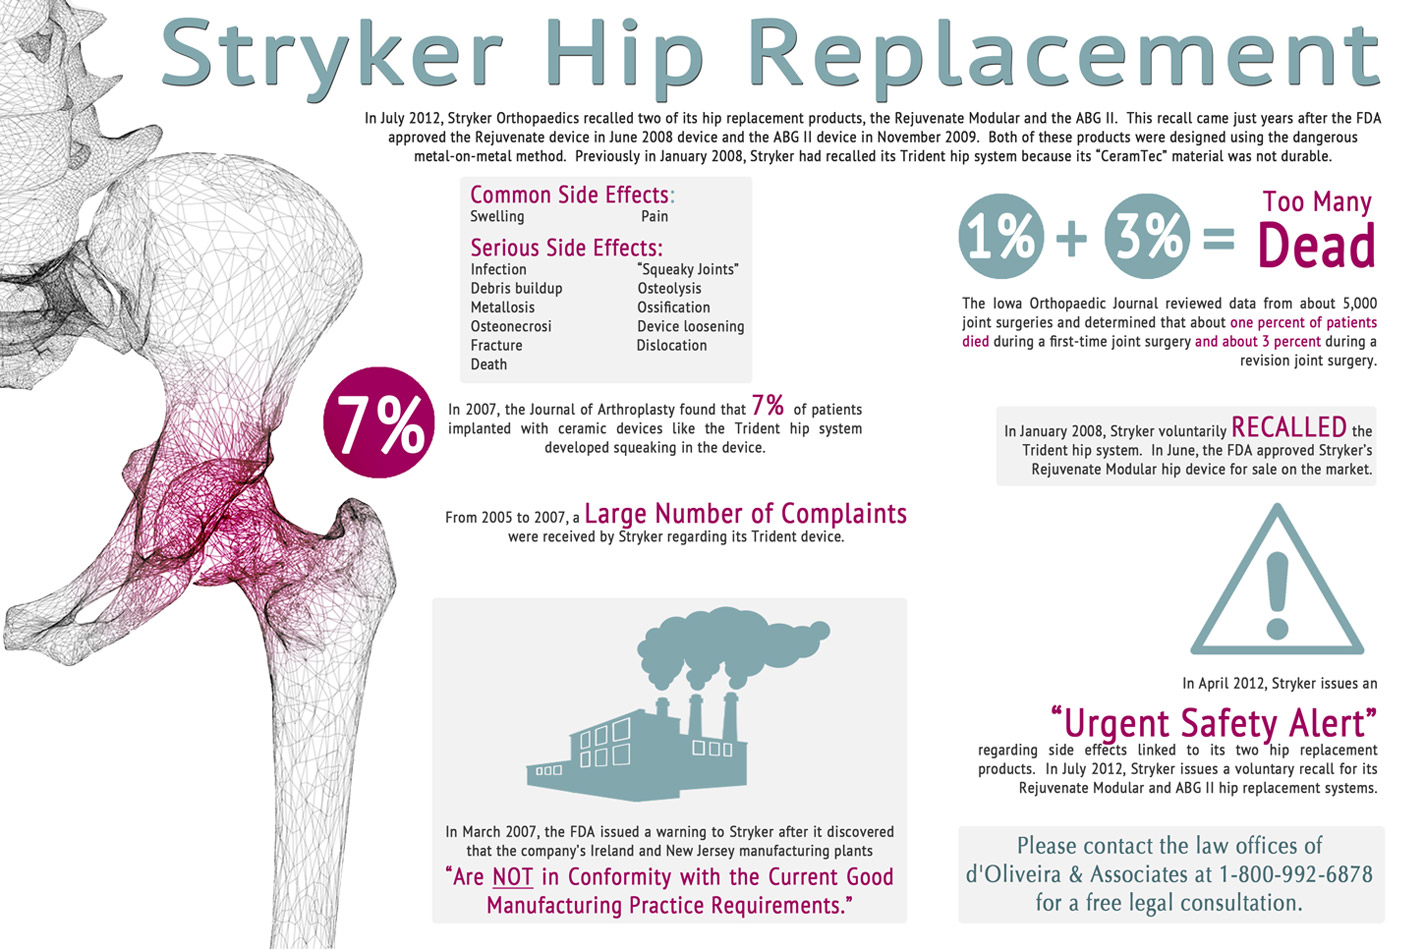 stryker hip replacement imfographic